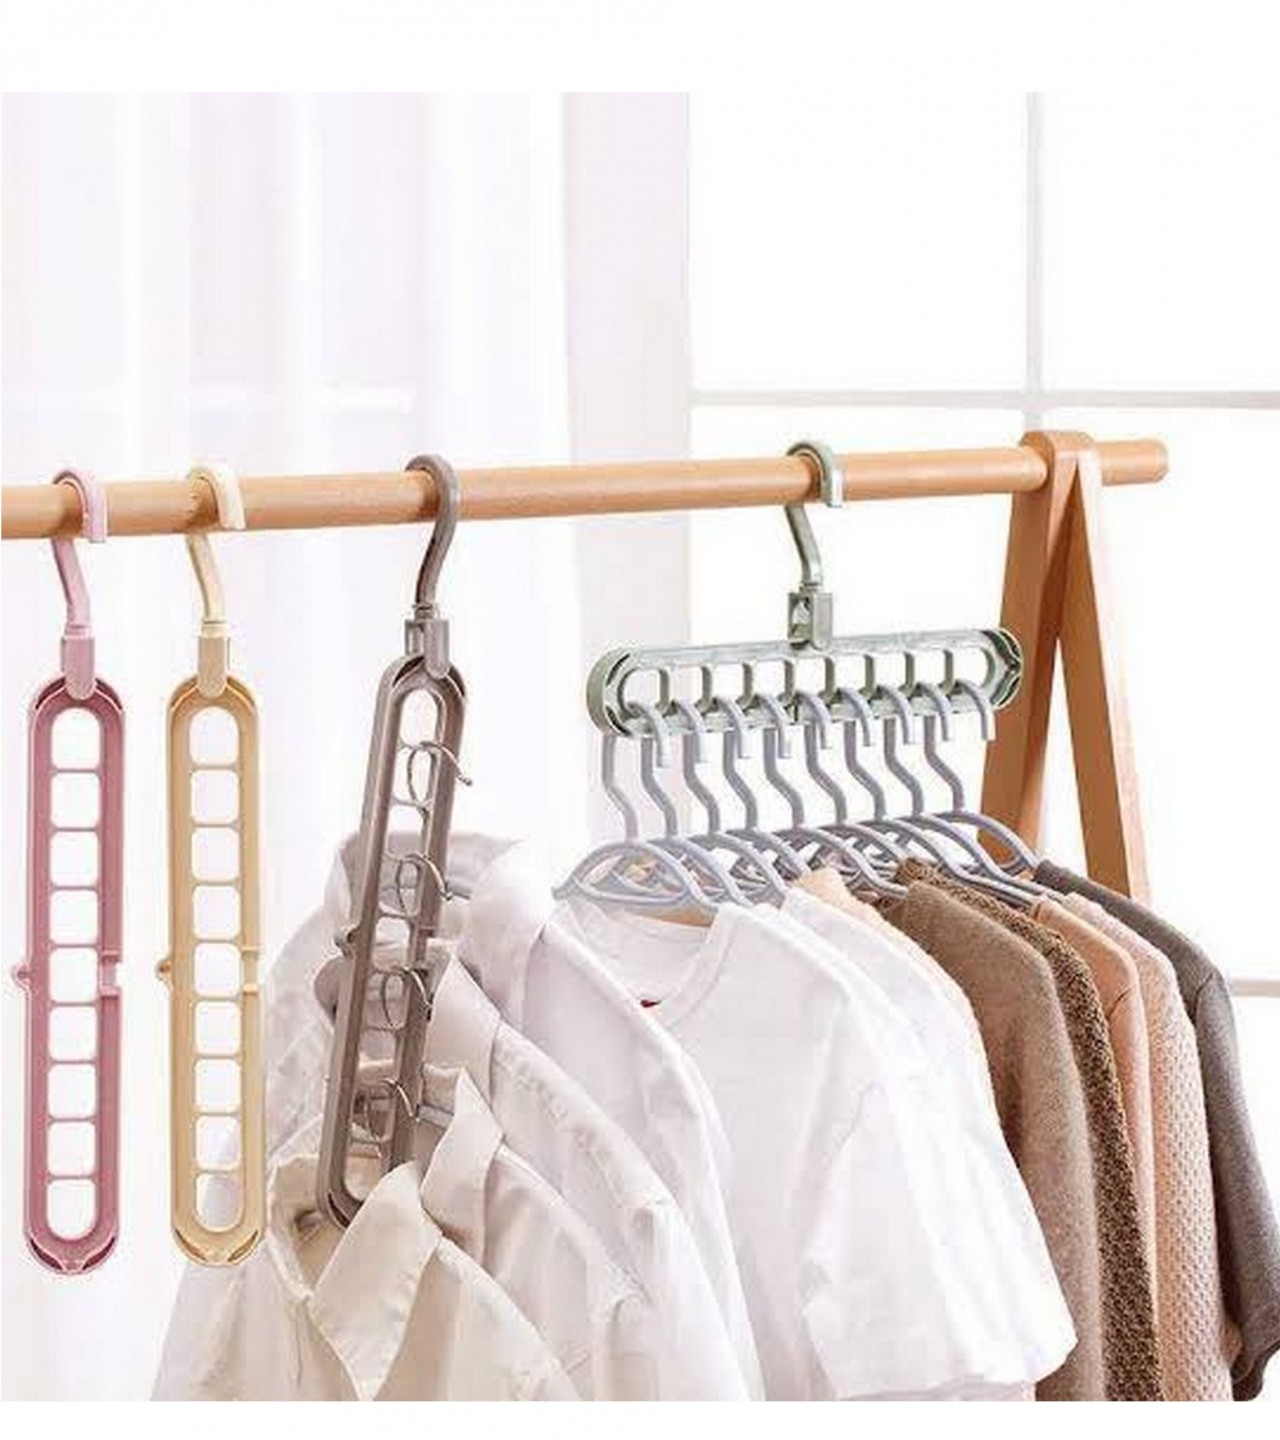 Multi purpose Cloth Hanger for Shirt Coat Babies Clothes Space Saver